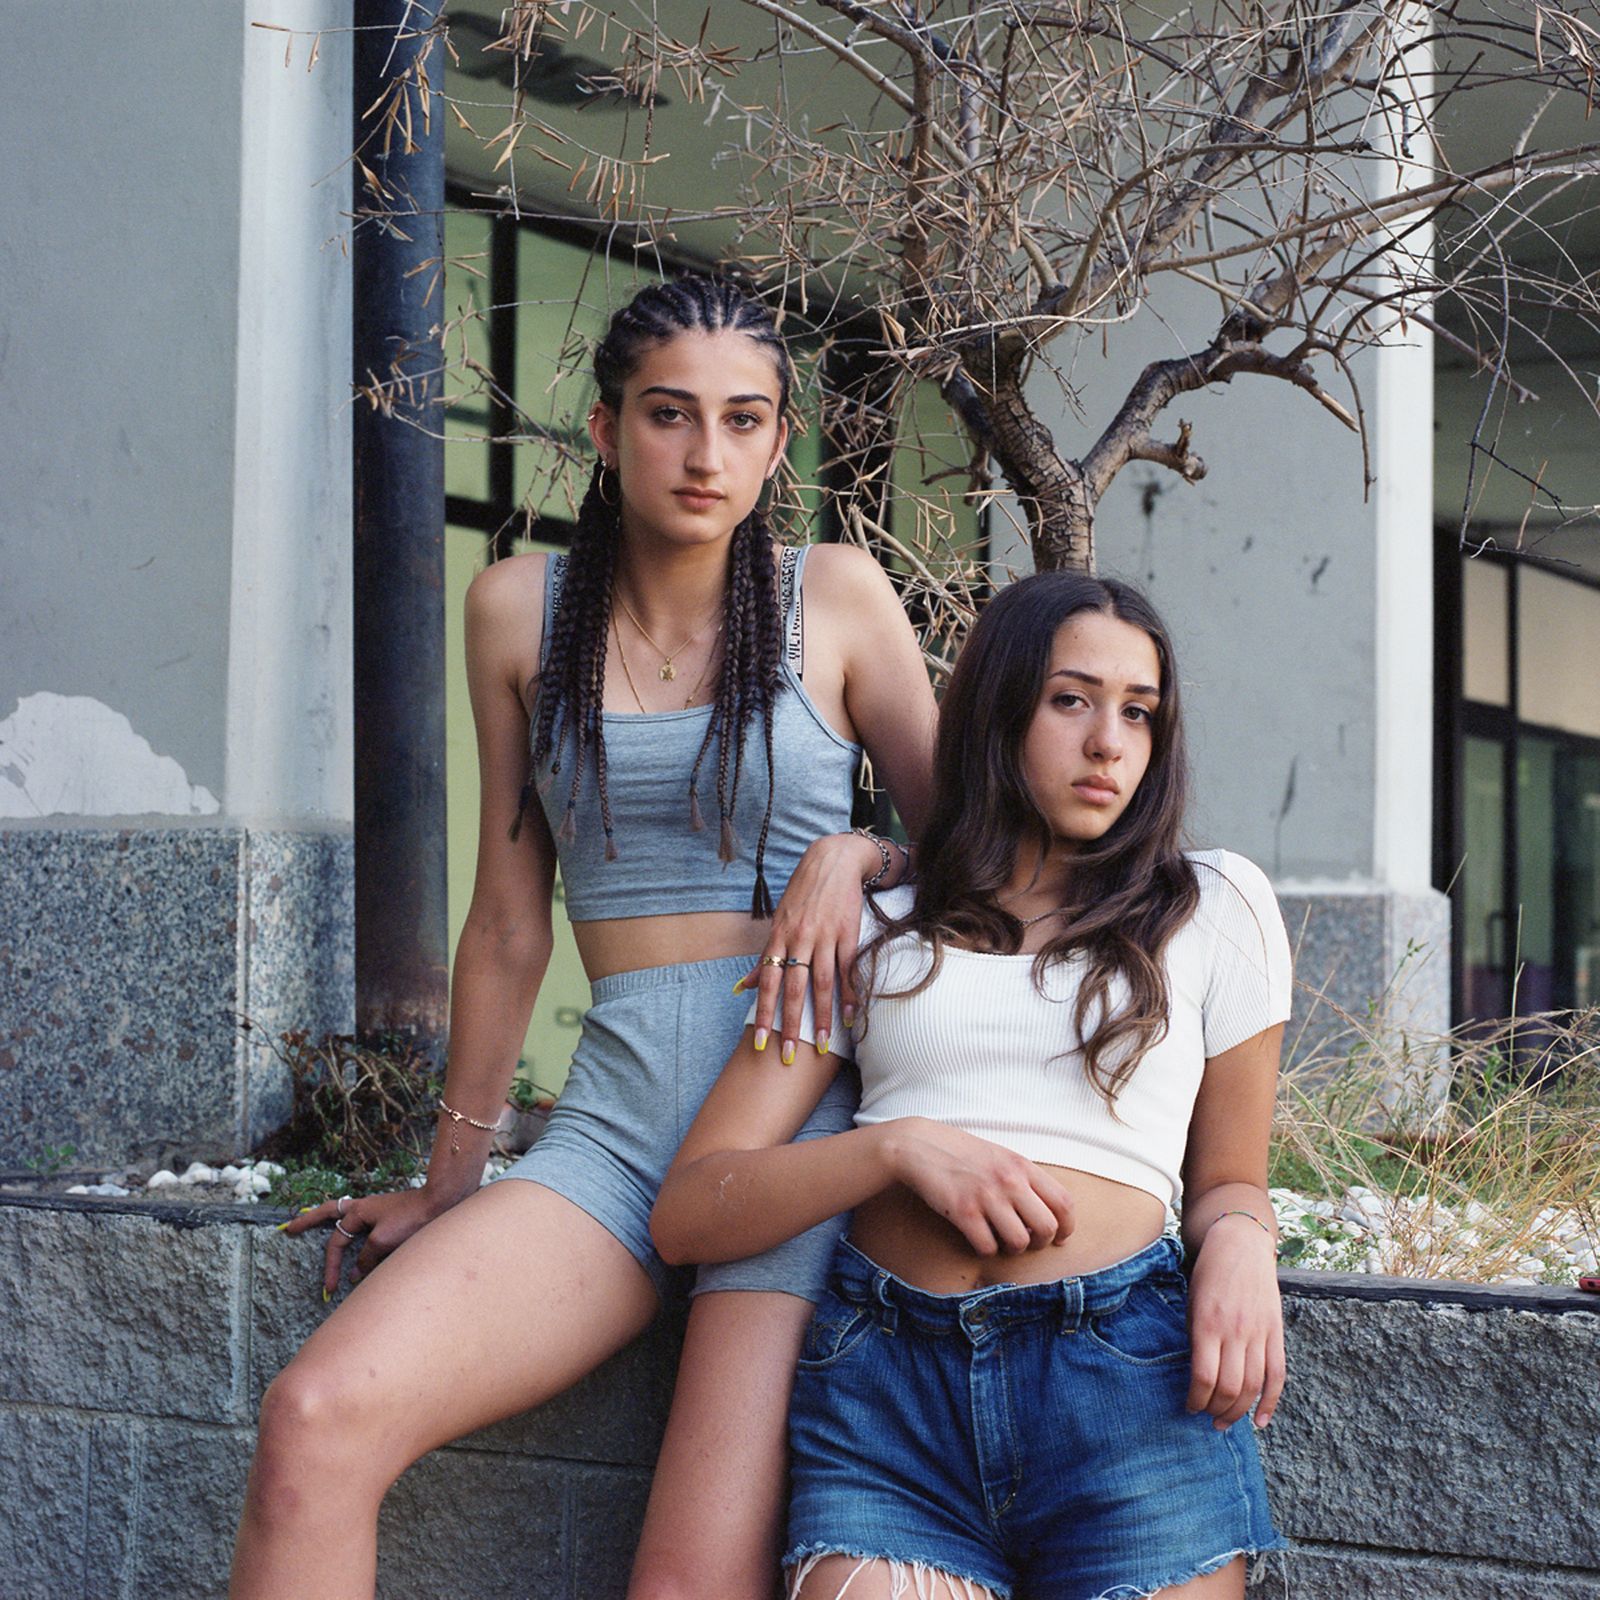 © Chiara Fossati - Linda and Angelica, 14 and 15 years old, dreams of moving to Usa together.